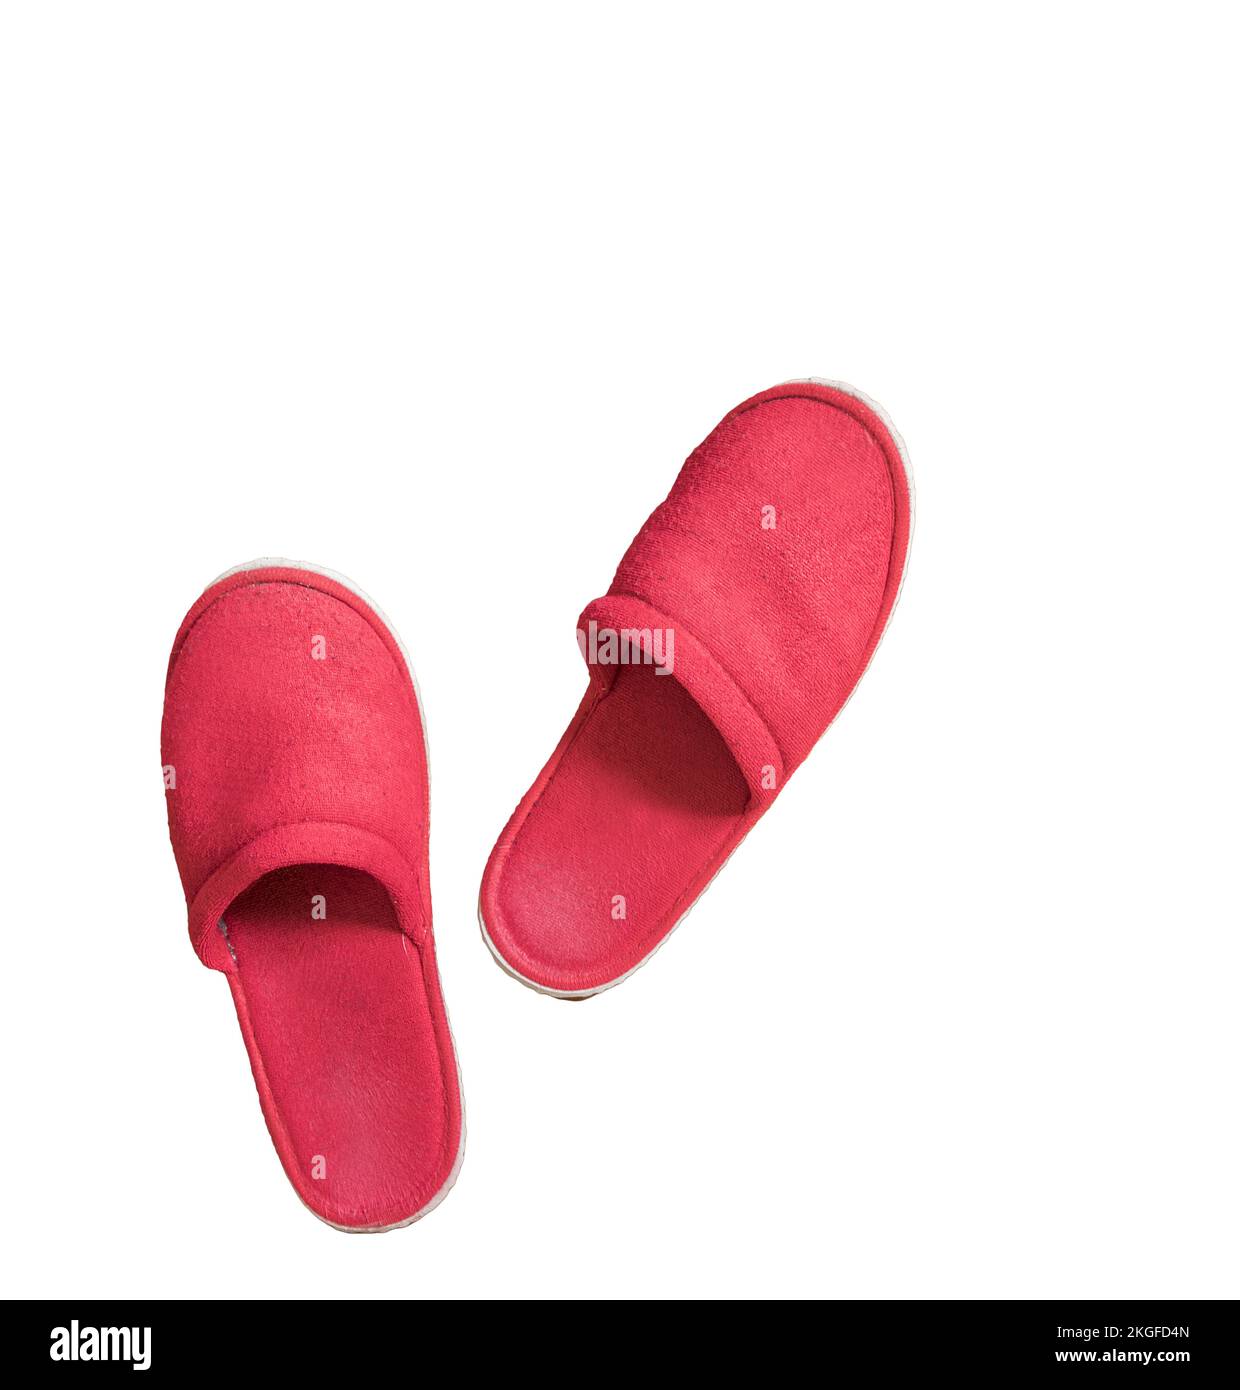 the red slippers on a transparent surface Stock Photo